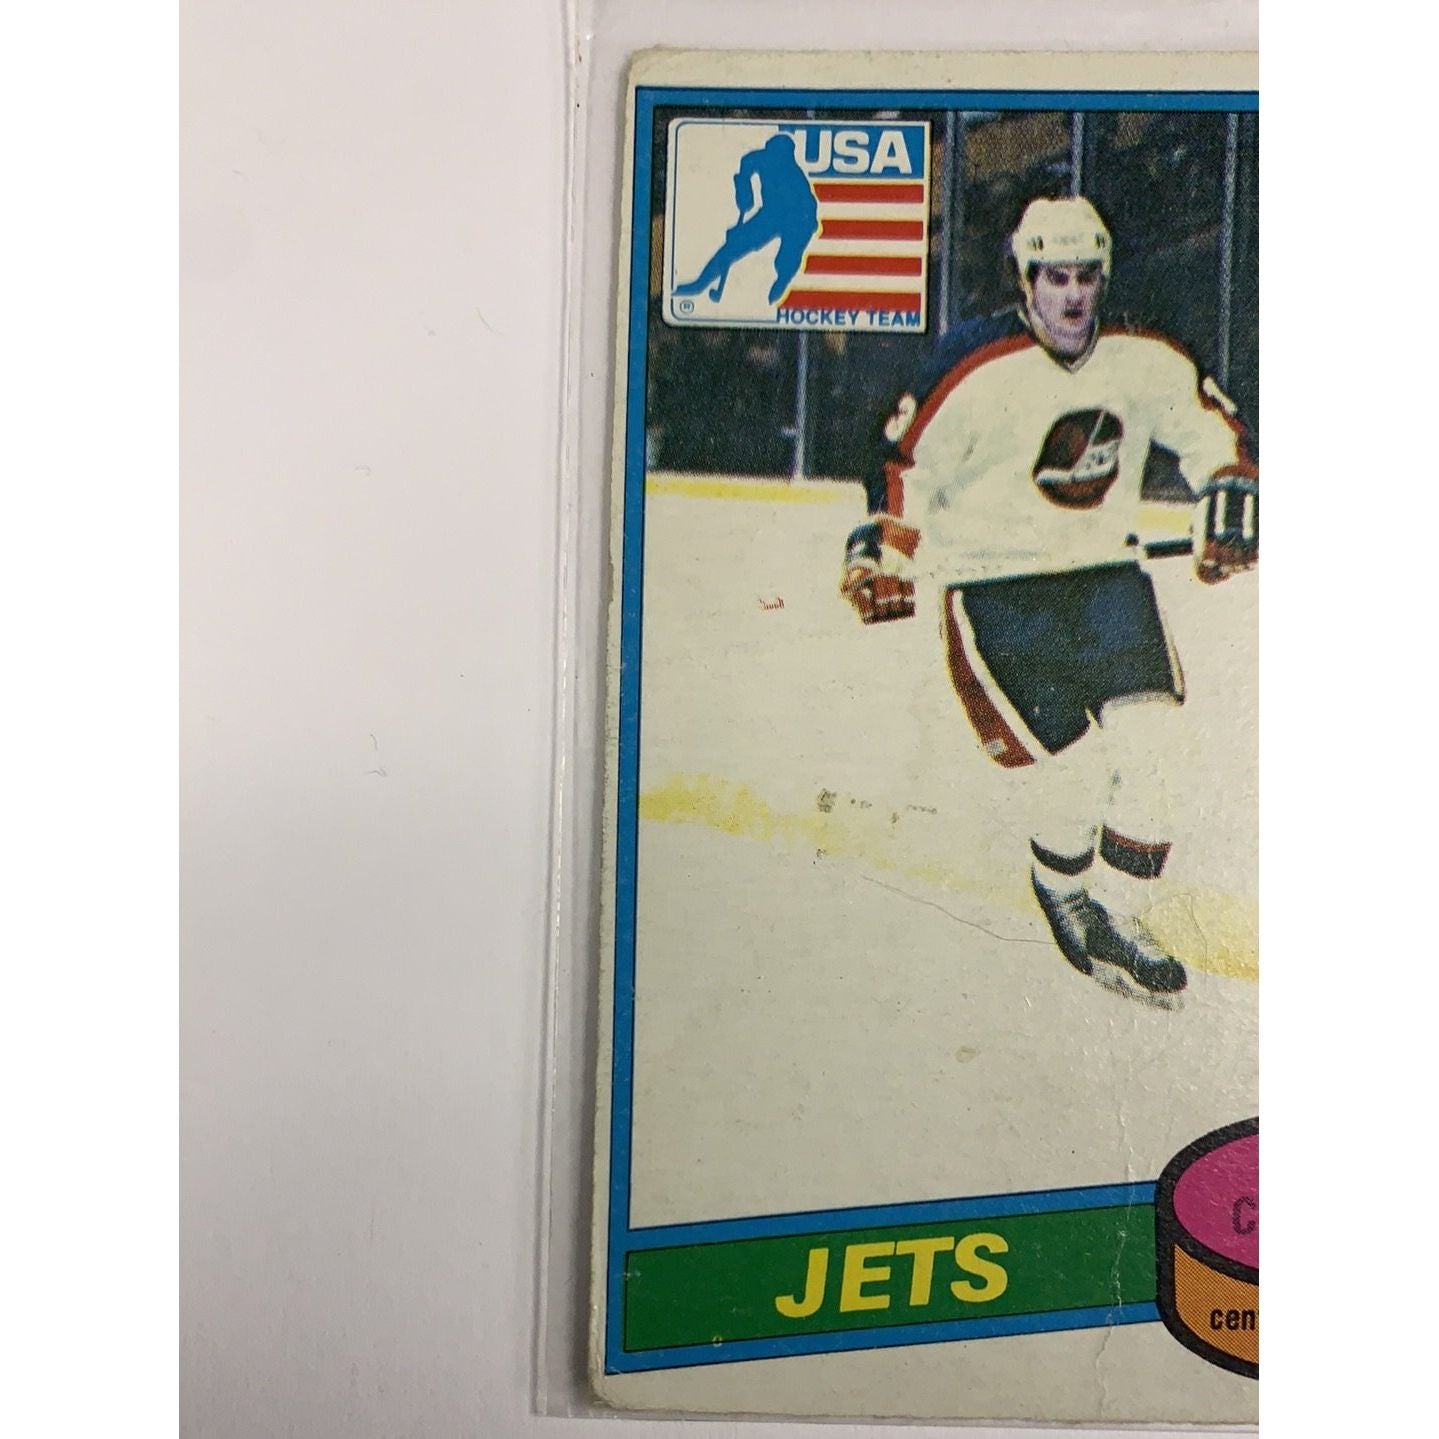  1980-81 O-Pee-Chee Dave Christian Team USA Insert  Local Legends Cards & Collectibles